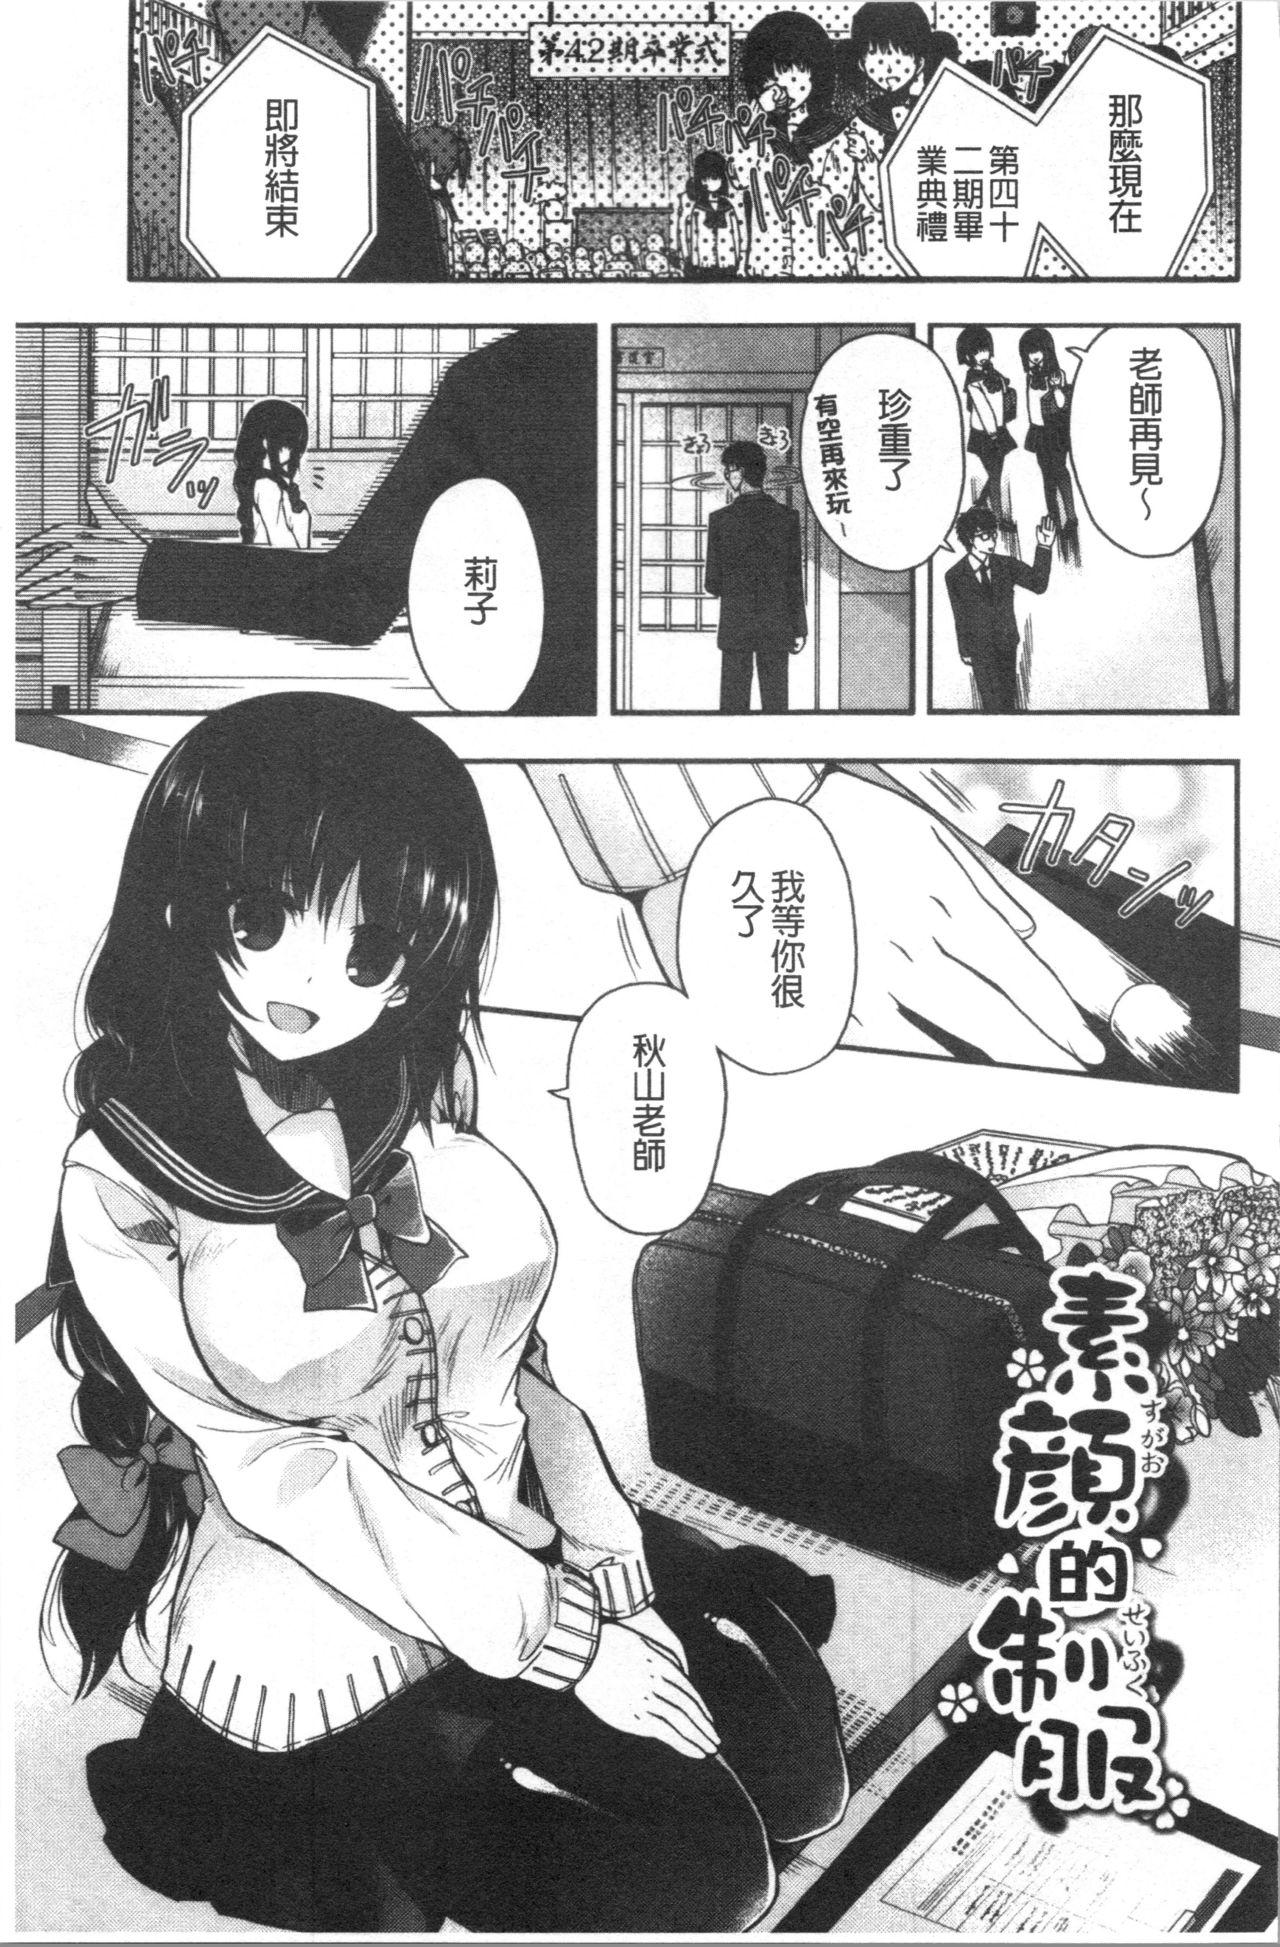 Hatsukoi Melty - Melty First Love 116